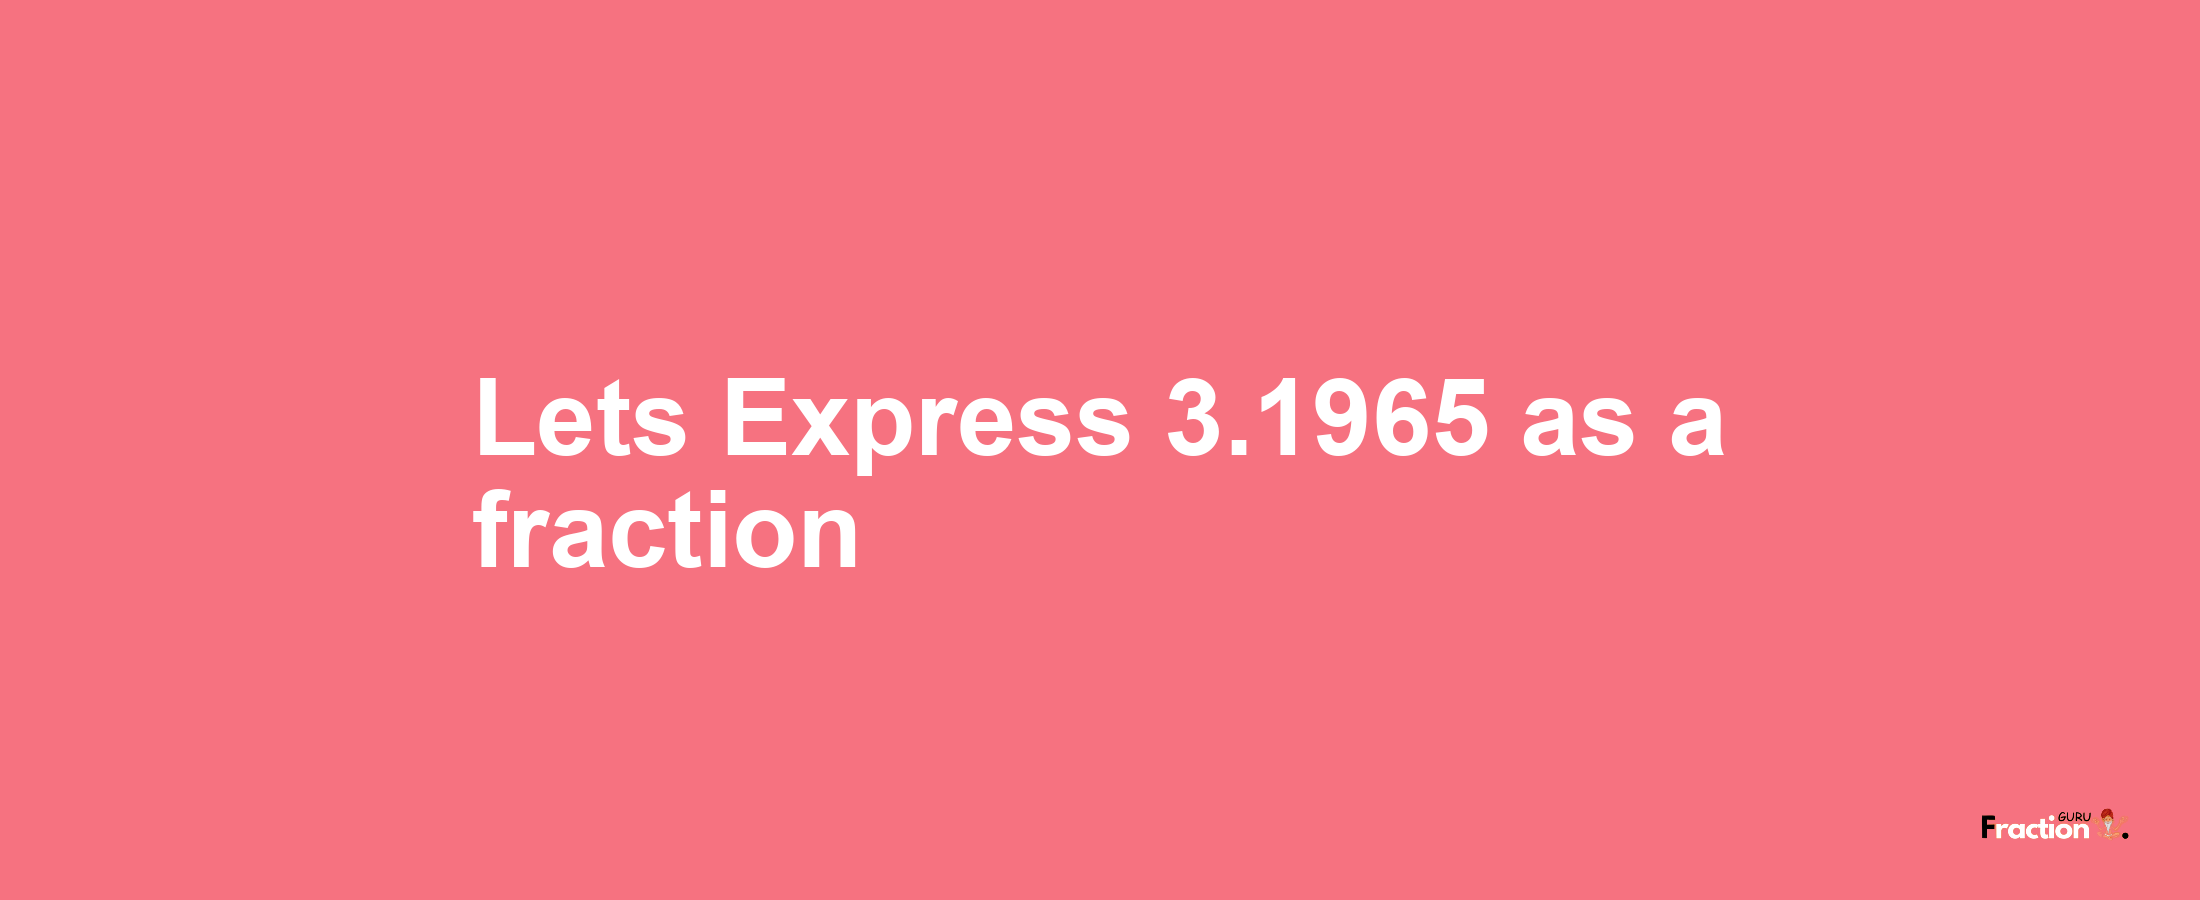 Lets Express 3.1965 as afraction